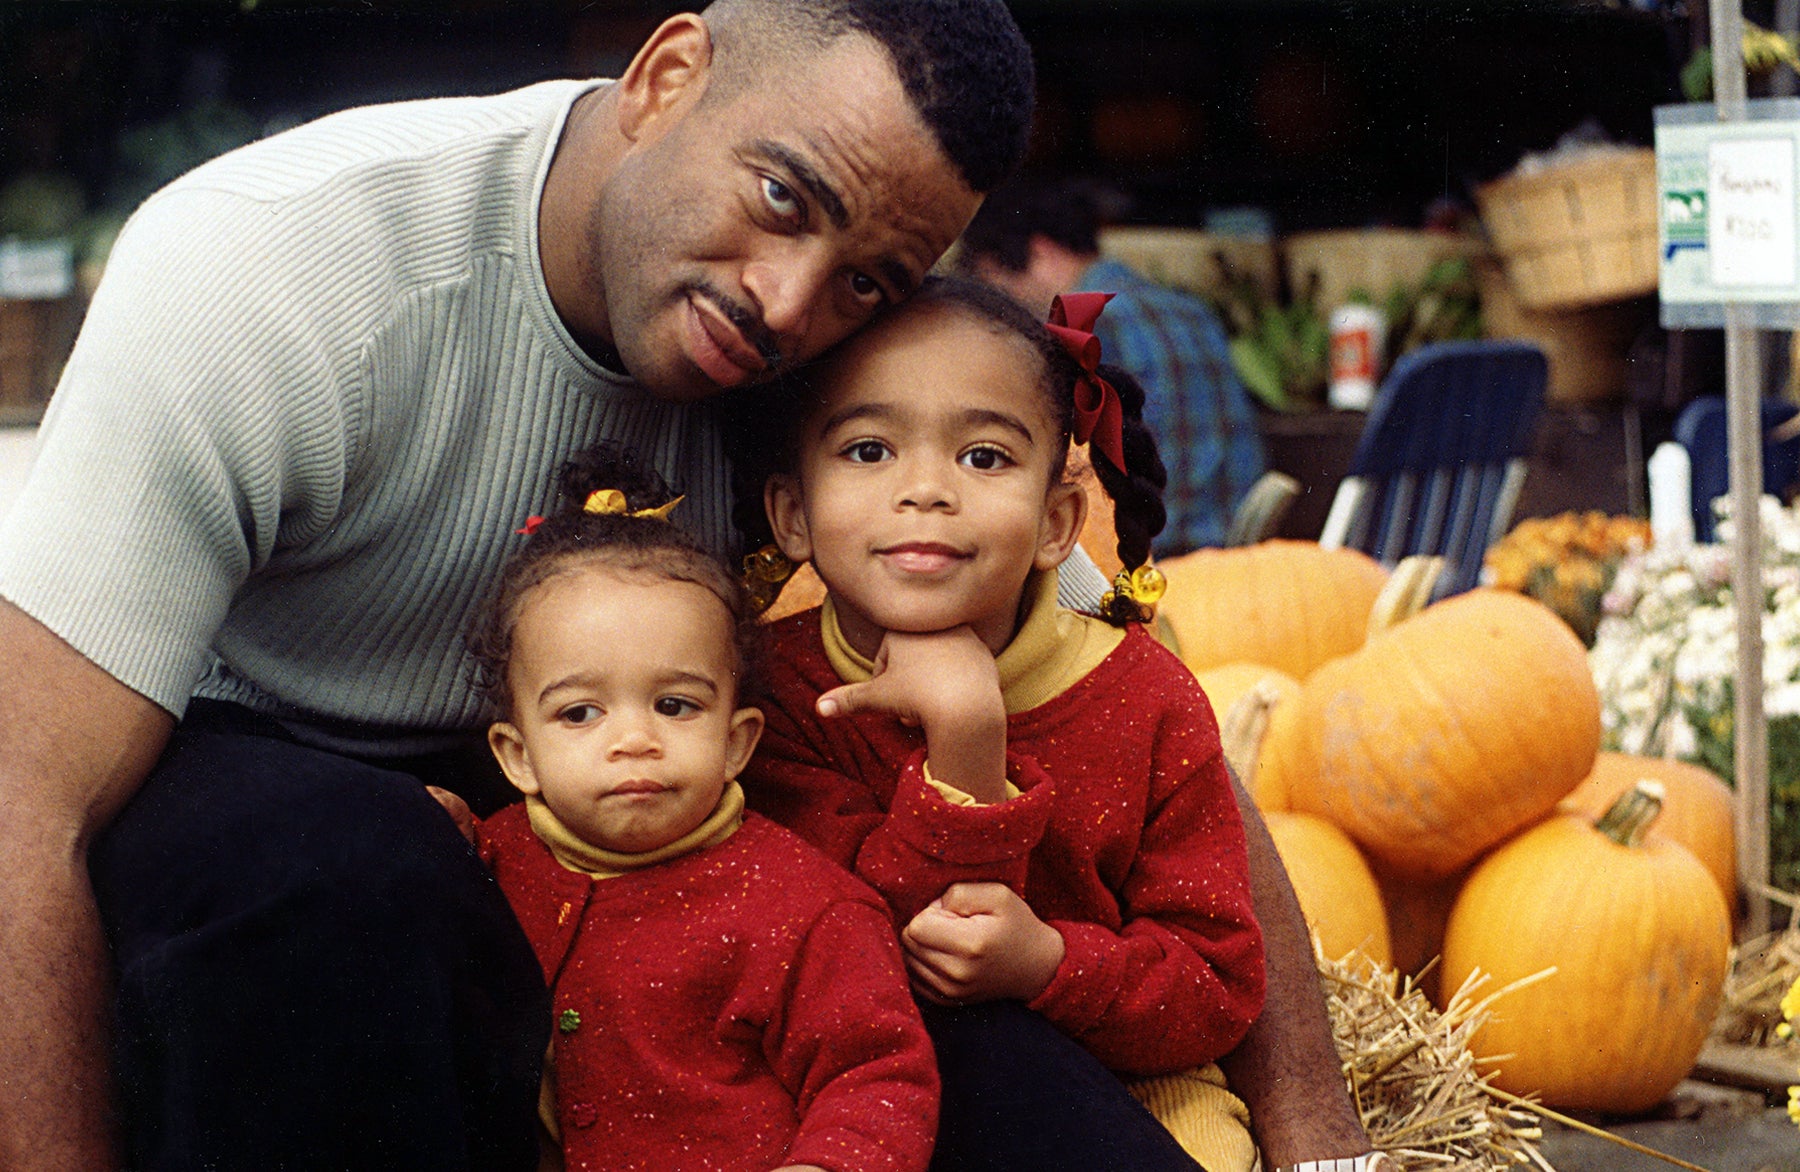 The Late Stuart Scott’s Daughters, Sydni And Taelor, On Grief And Upholding Their Father’s Legacy